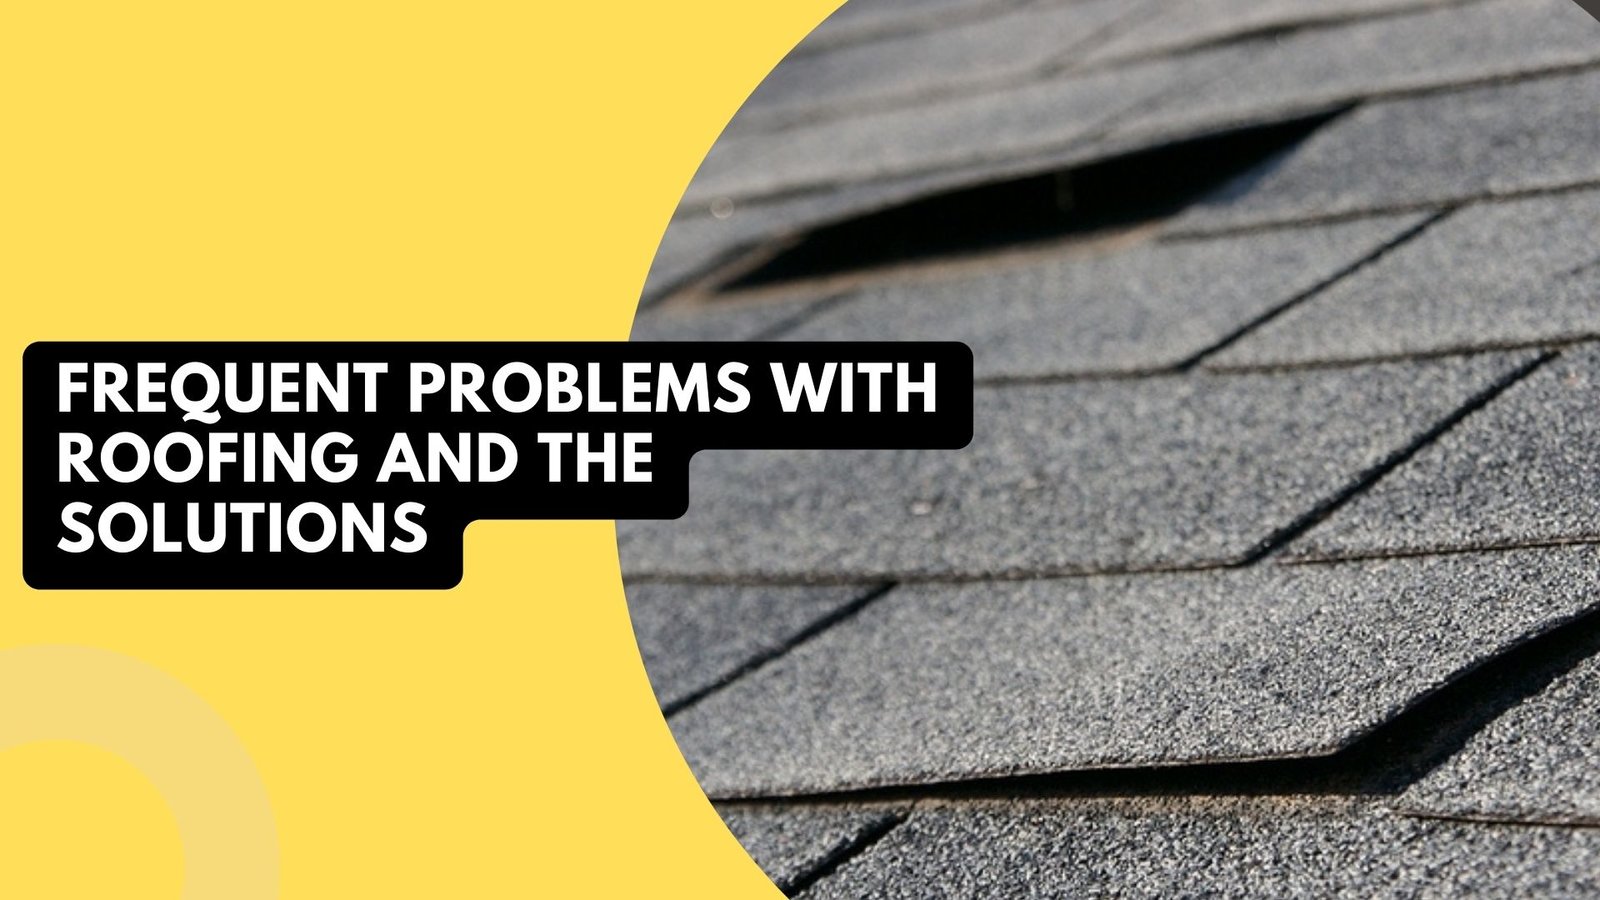 Frequent Problems With Roofing And The Solutions